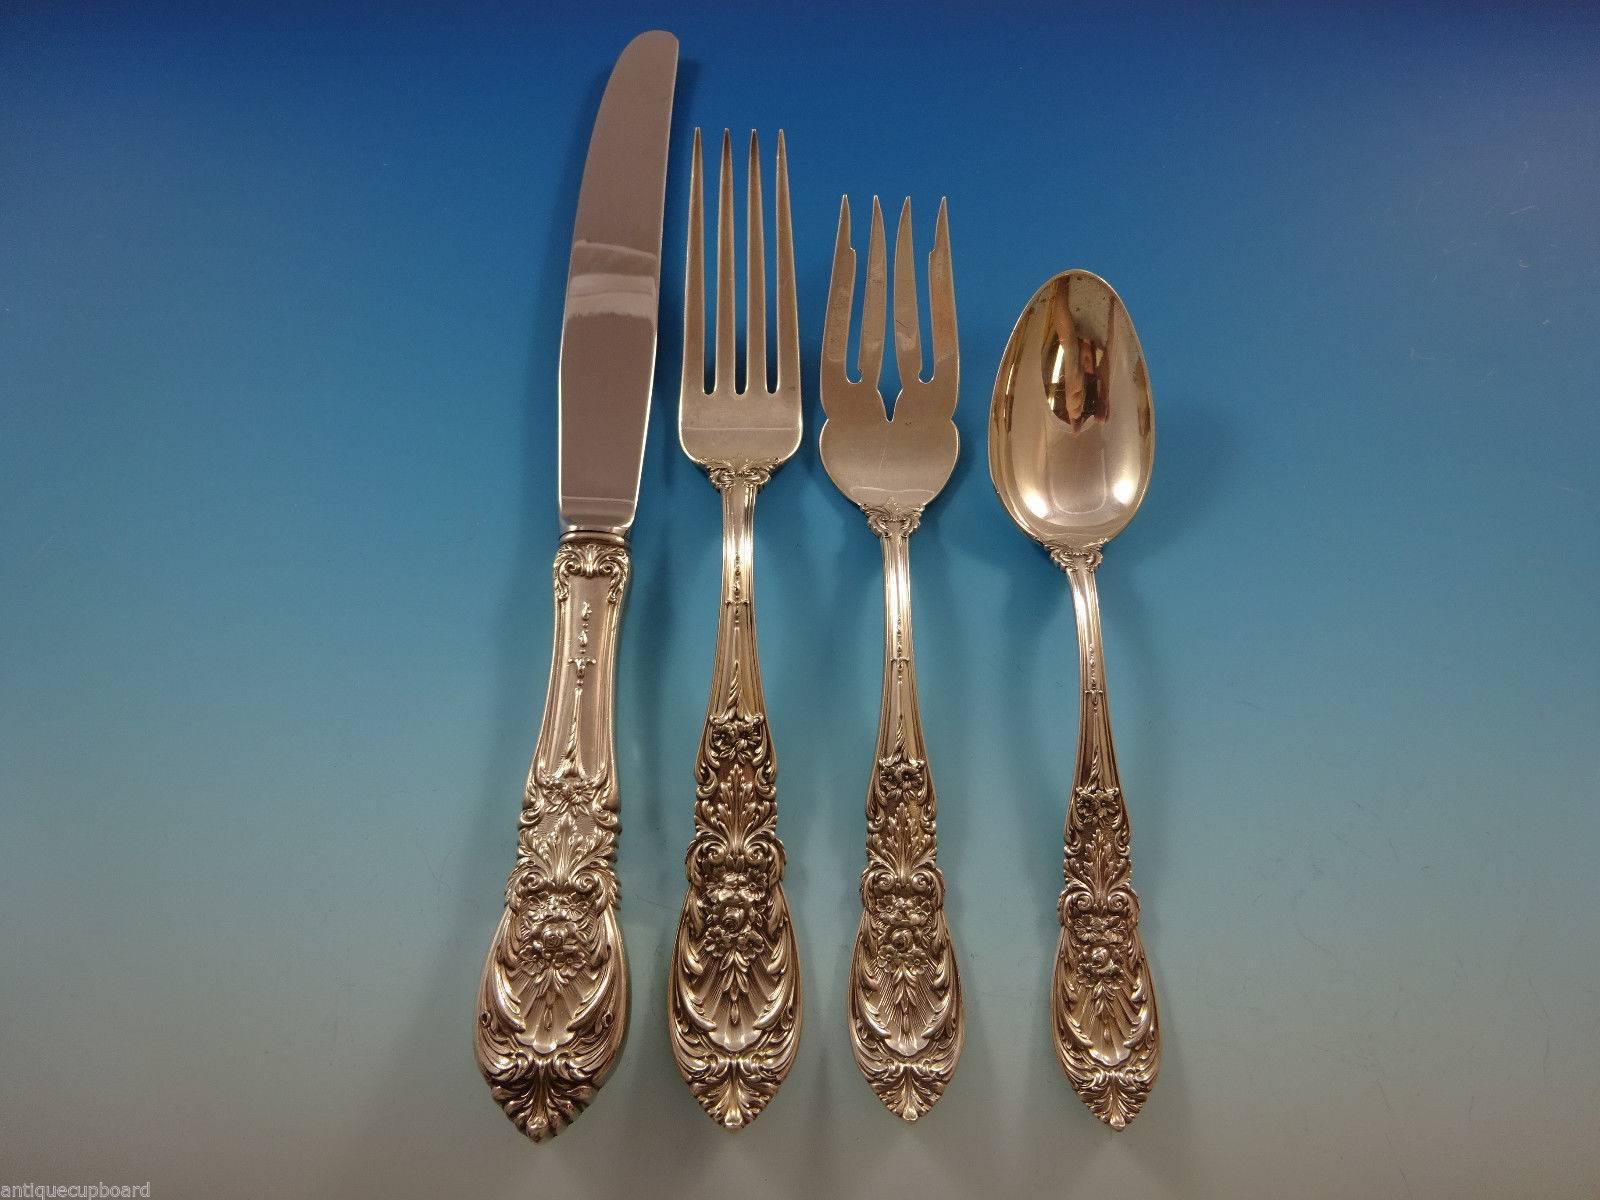 Richelieu by International Sterling Silver Flatware Set - 32 Pieces. This set includes: 

8 KNIVES, 9 1/4